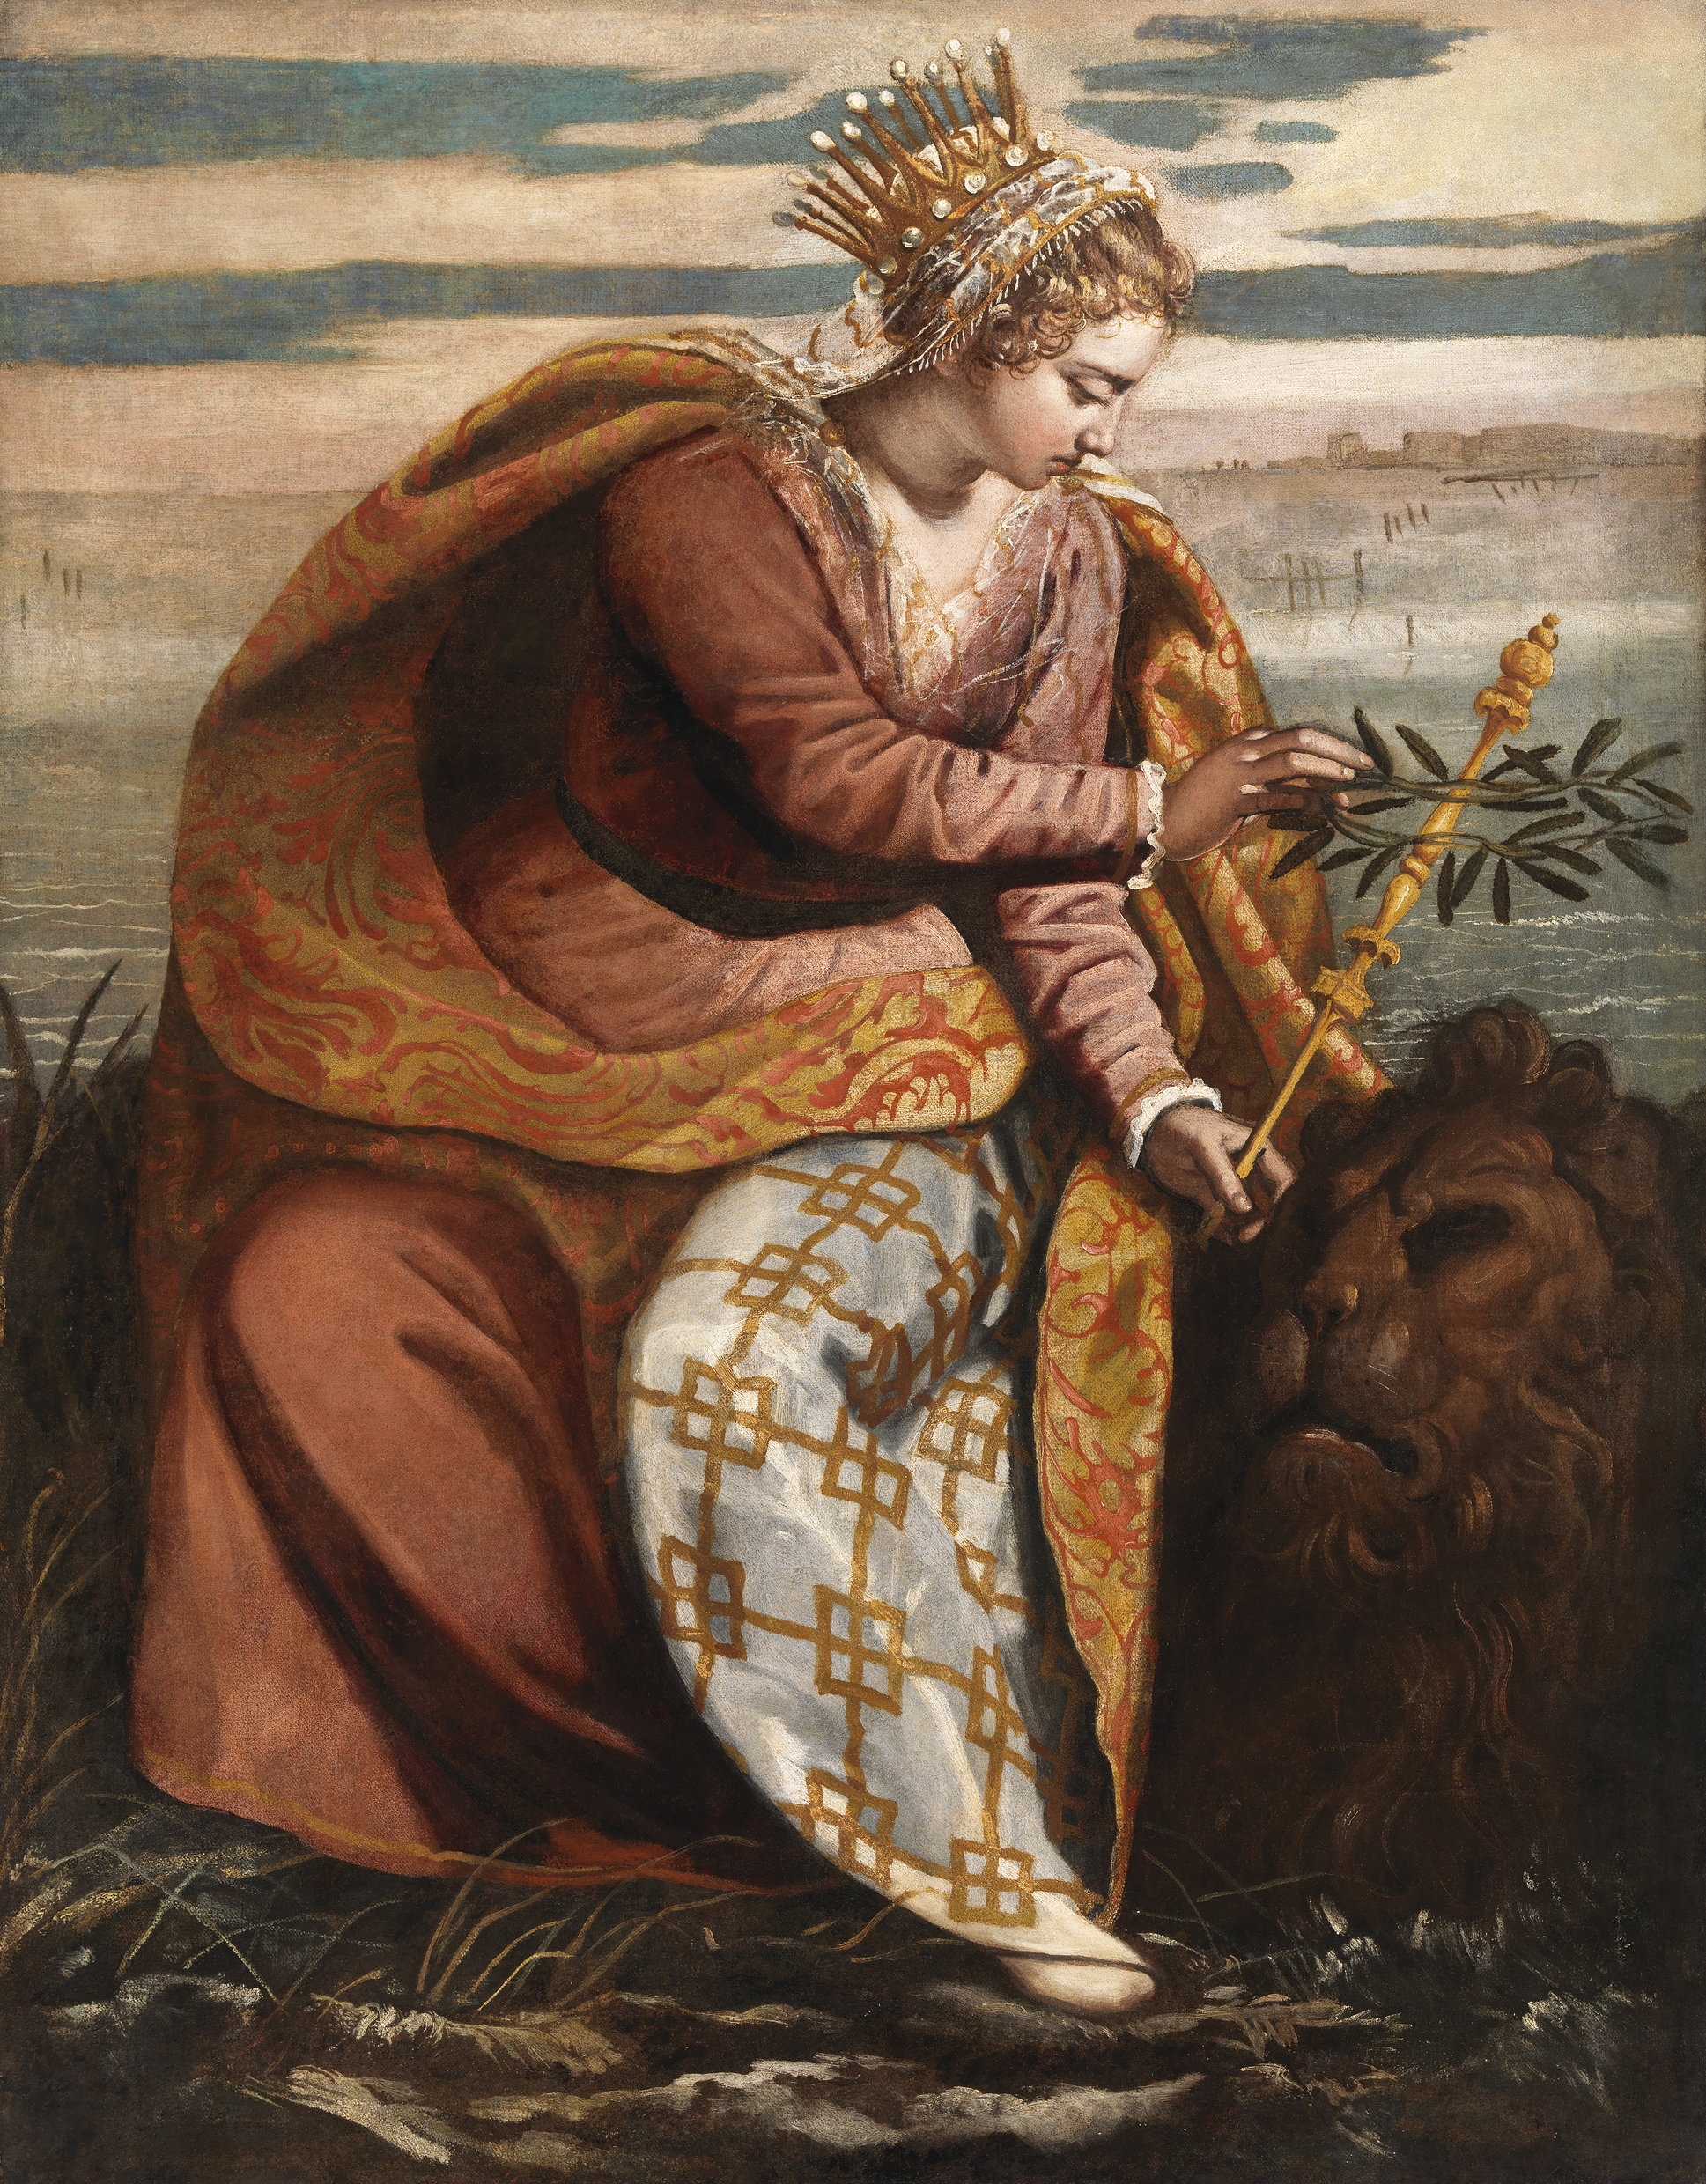 A woman wearing a crown sitting by the ocean crowns a lion with a laurel wreath